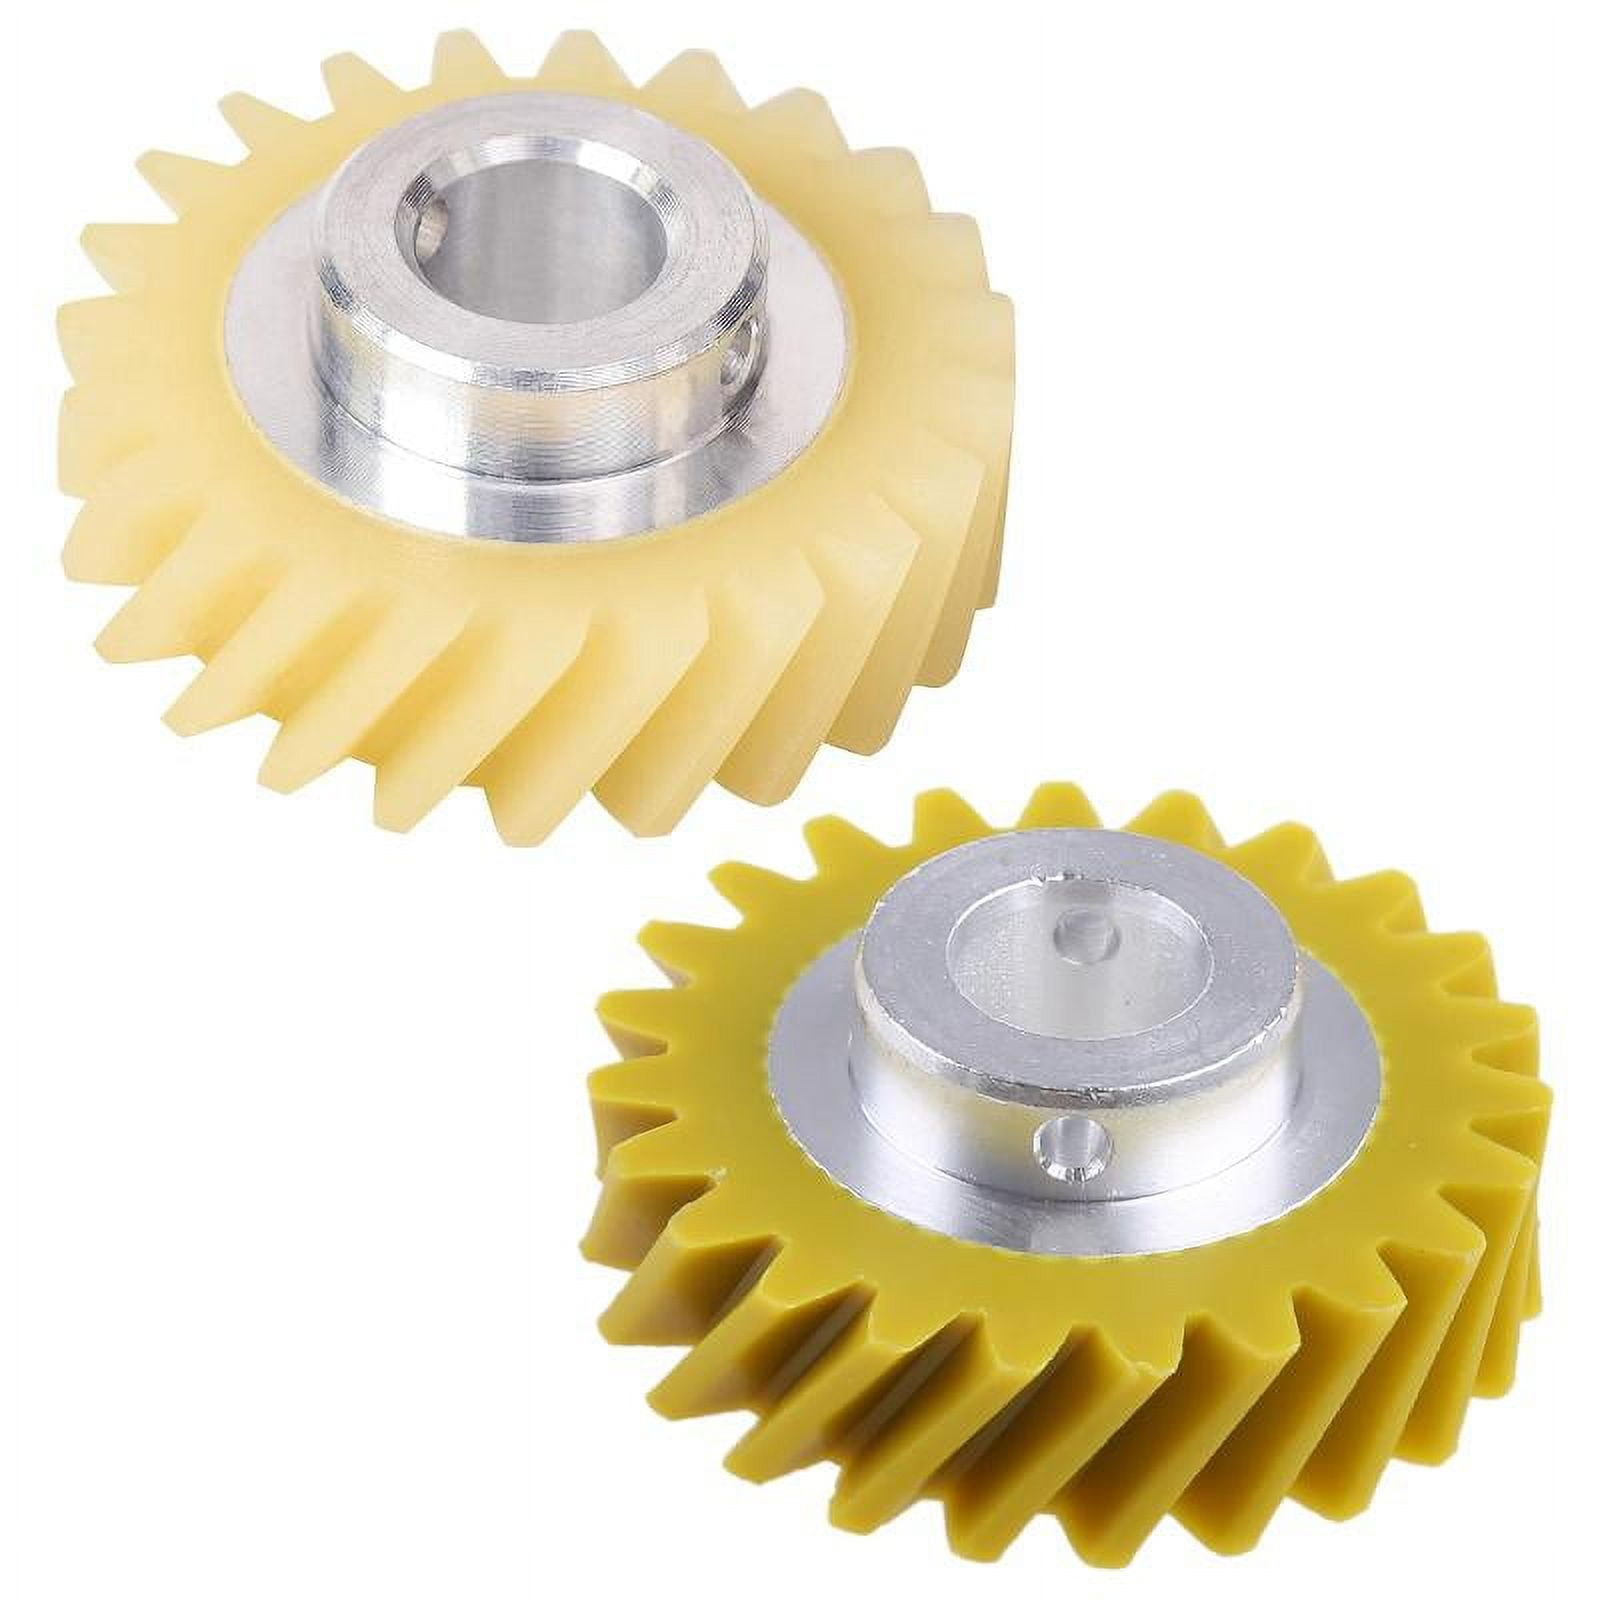 W10112253 Mixer Worm Gear Replacement Part by Vloeisn, for